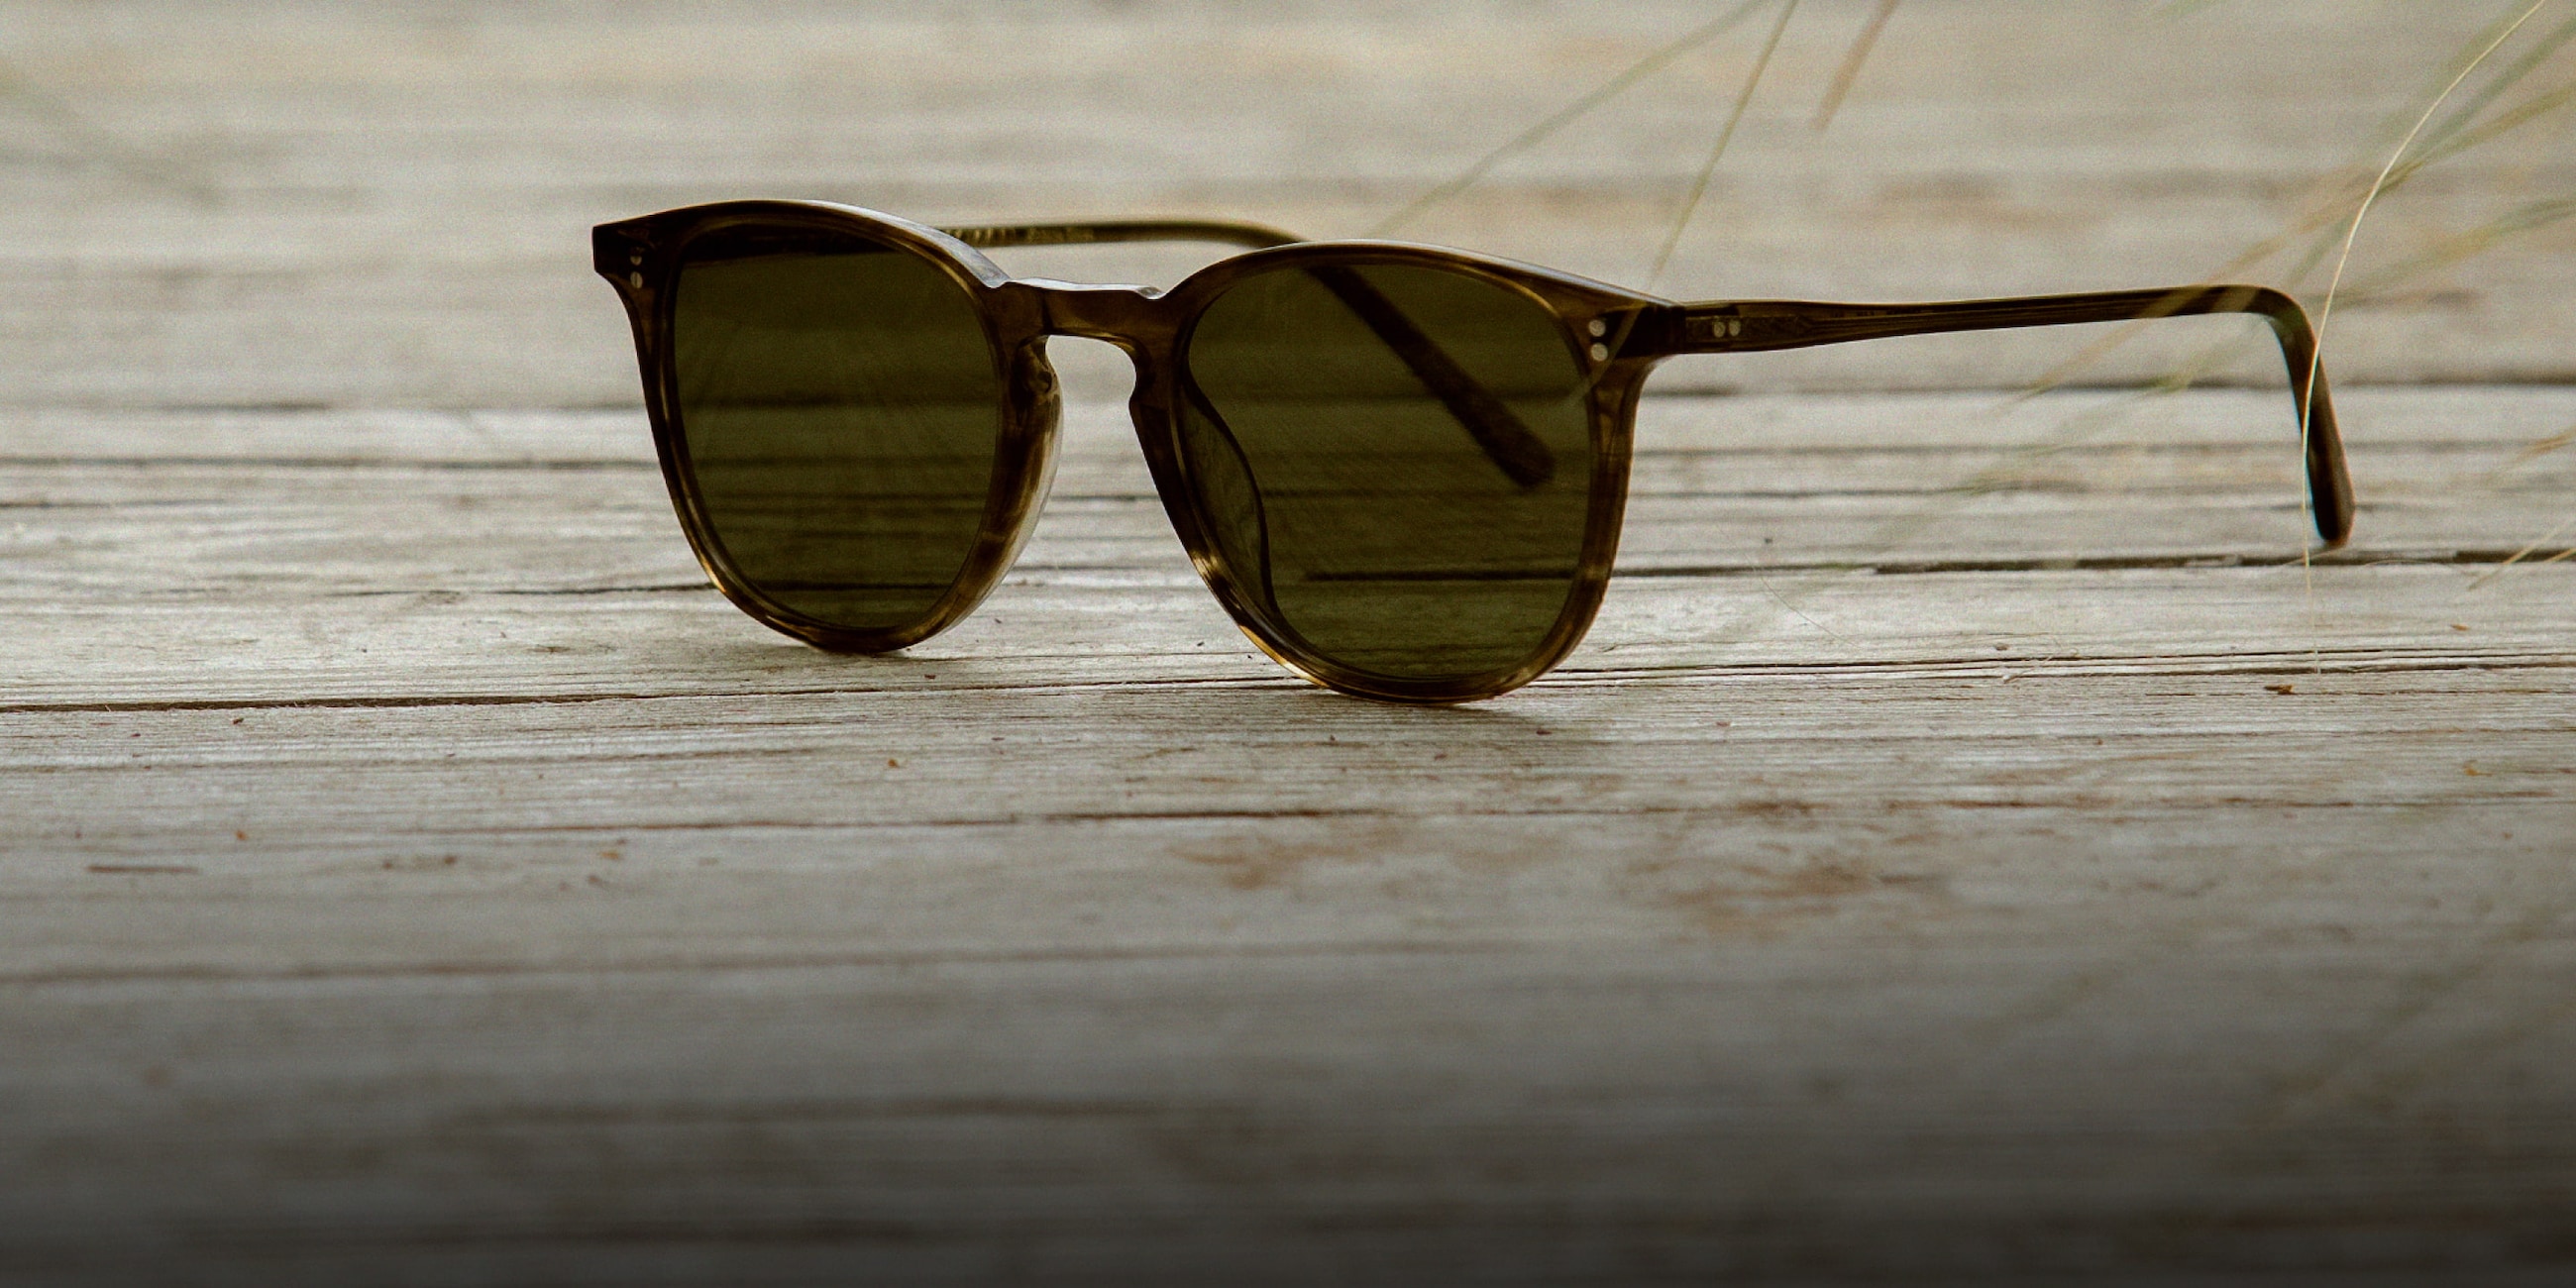 Oliver Finley 1993 Sun Exclusive Sunglasses in Soft Olive Bark